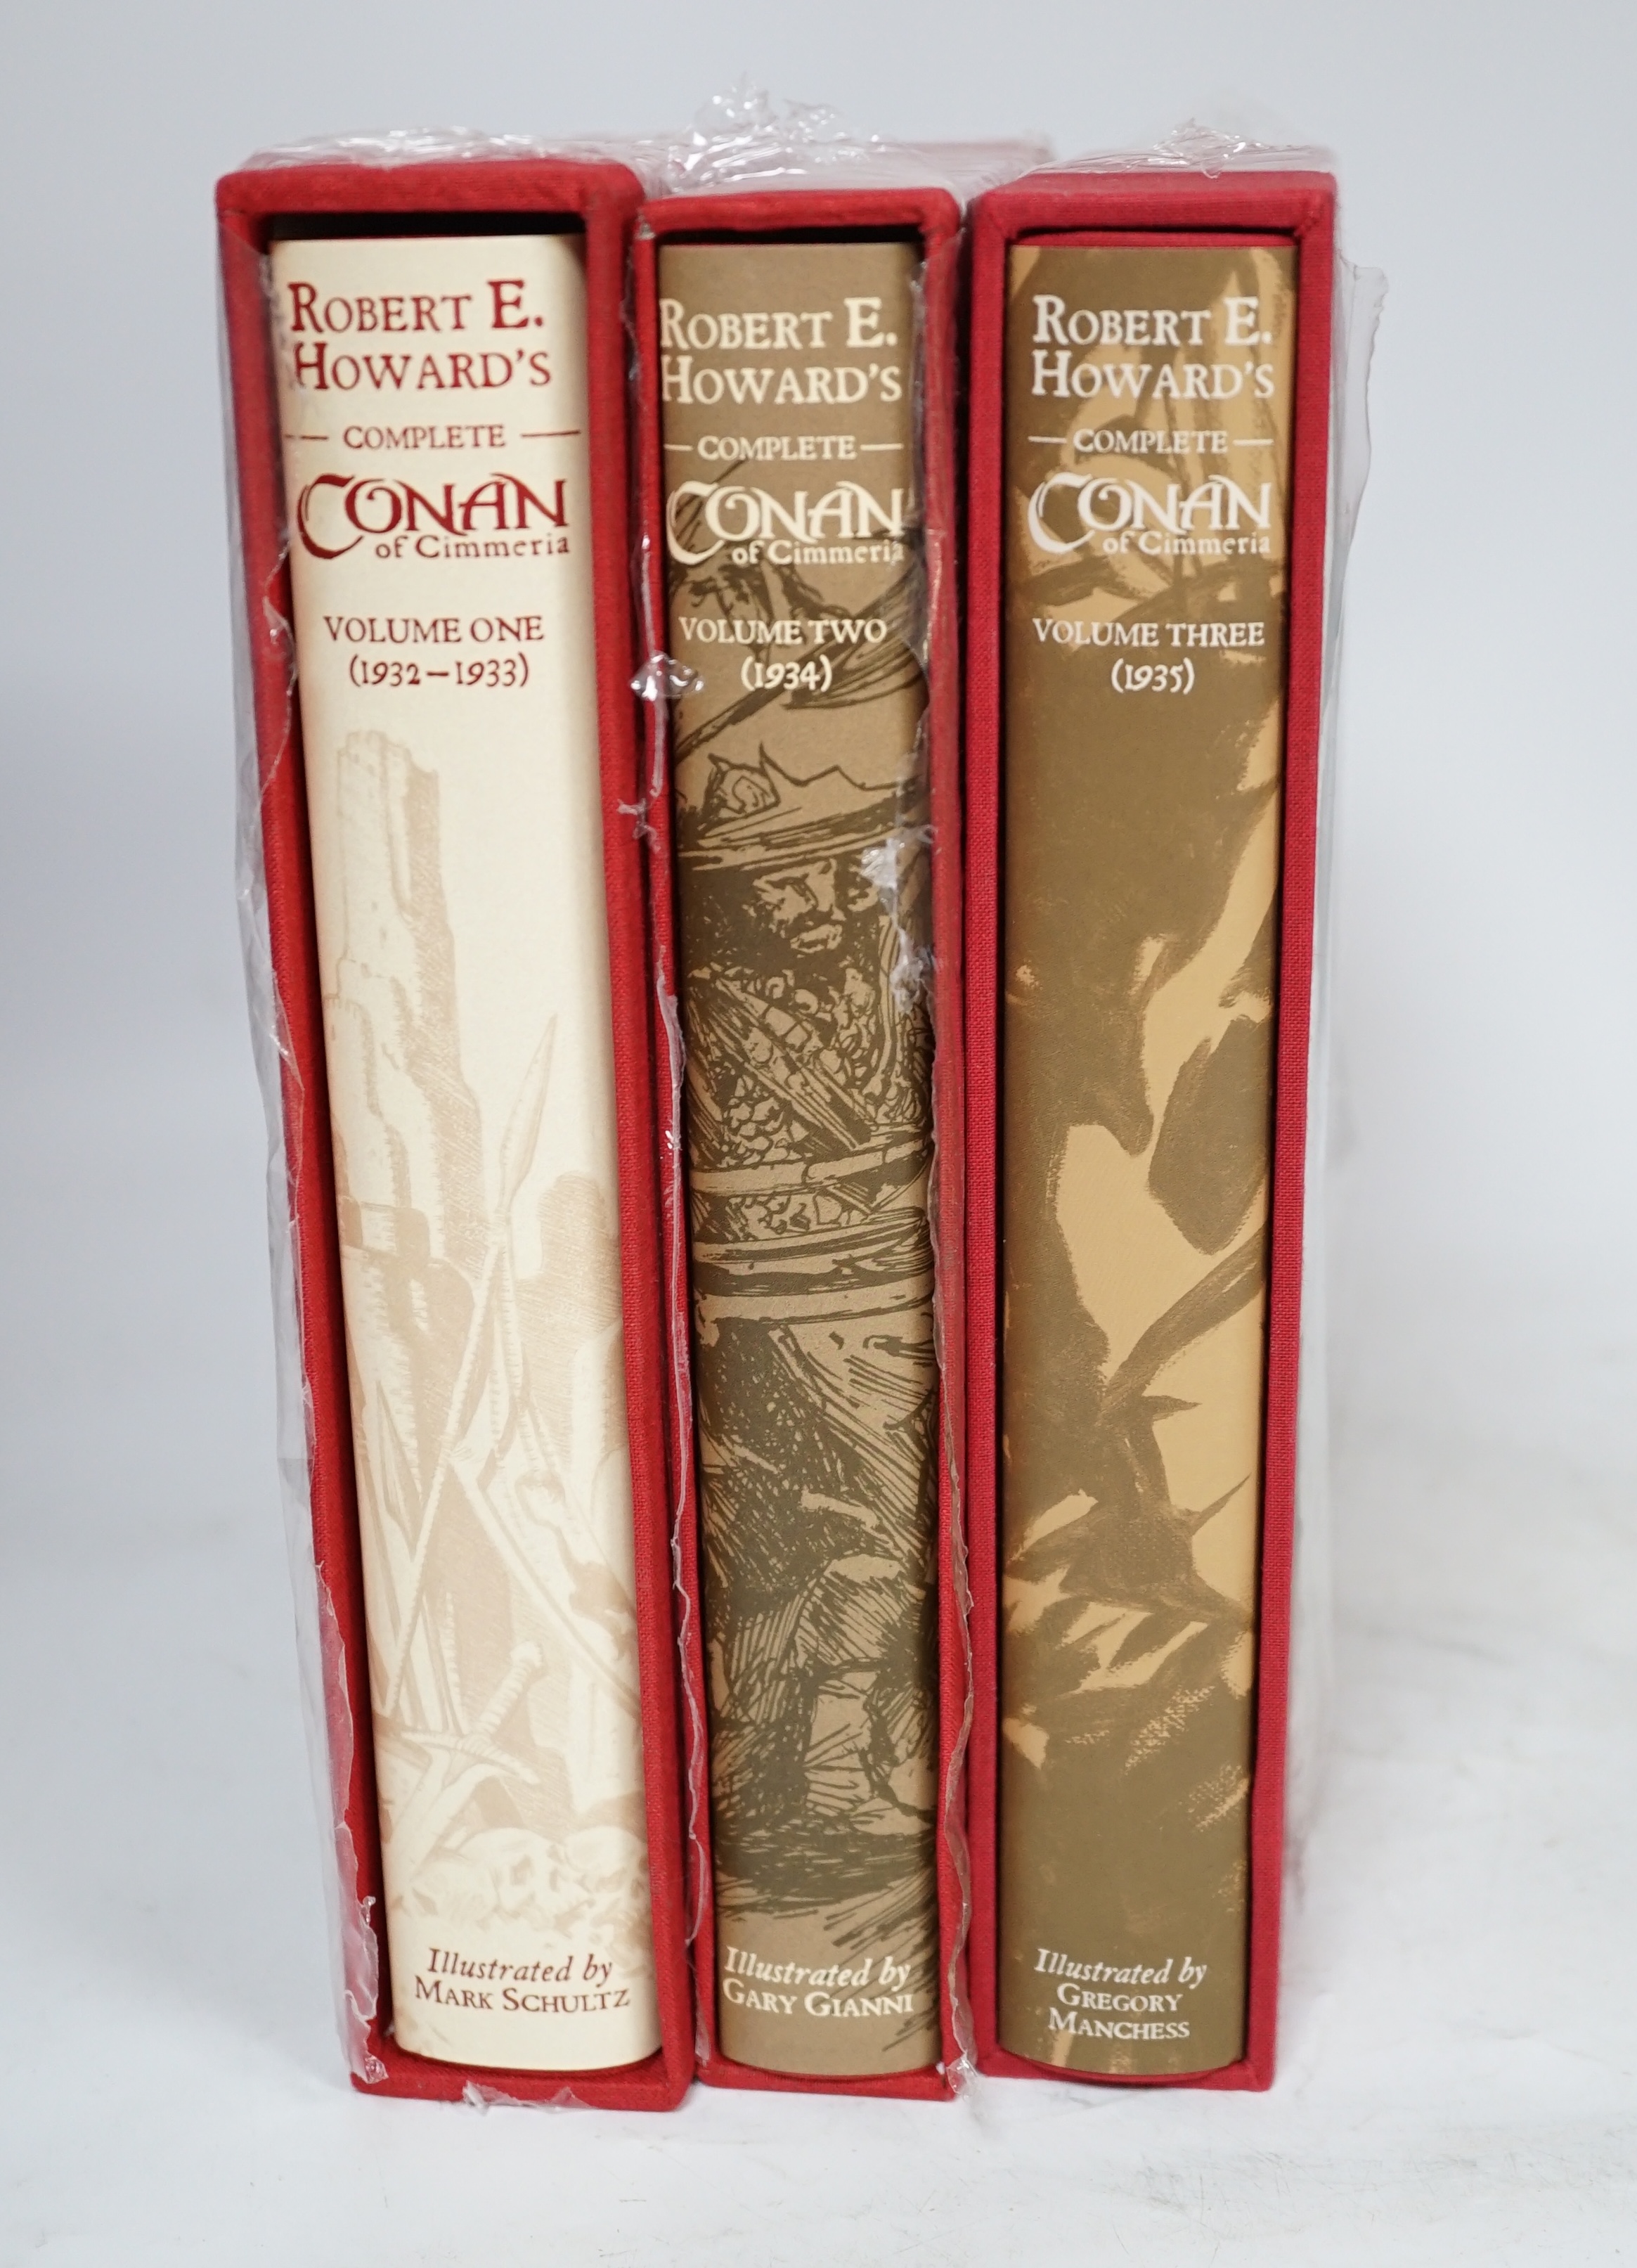 Robert E. Howard; Conan of Cimmeria (three volumes), signed limited editions in individual slip cases